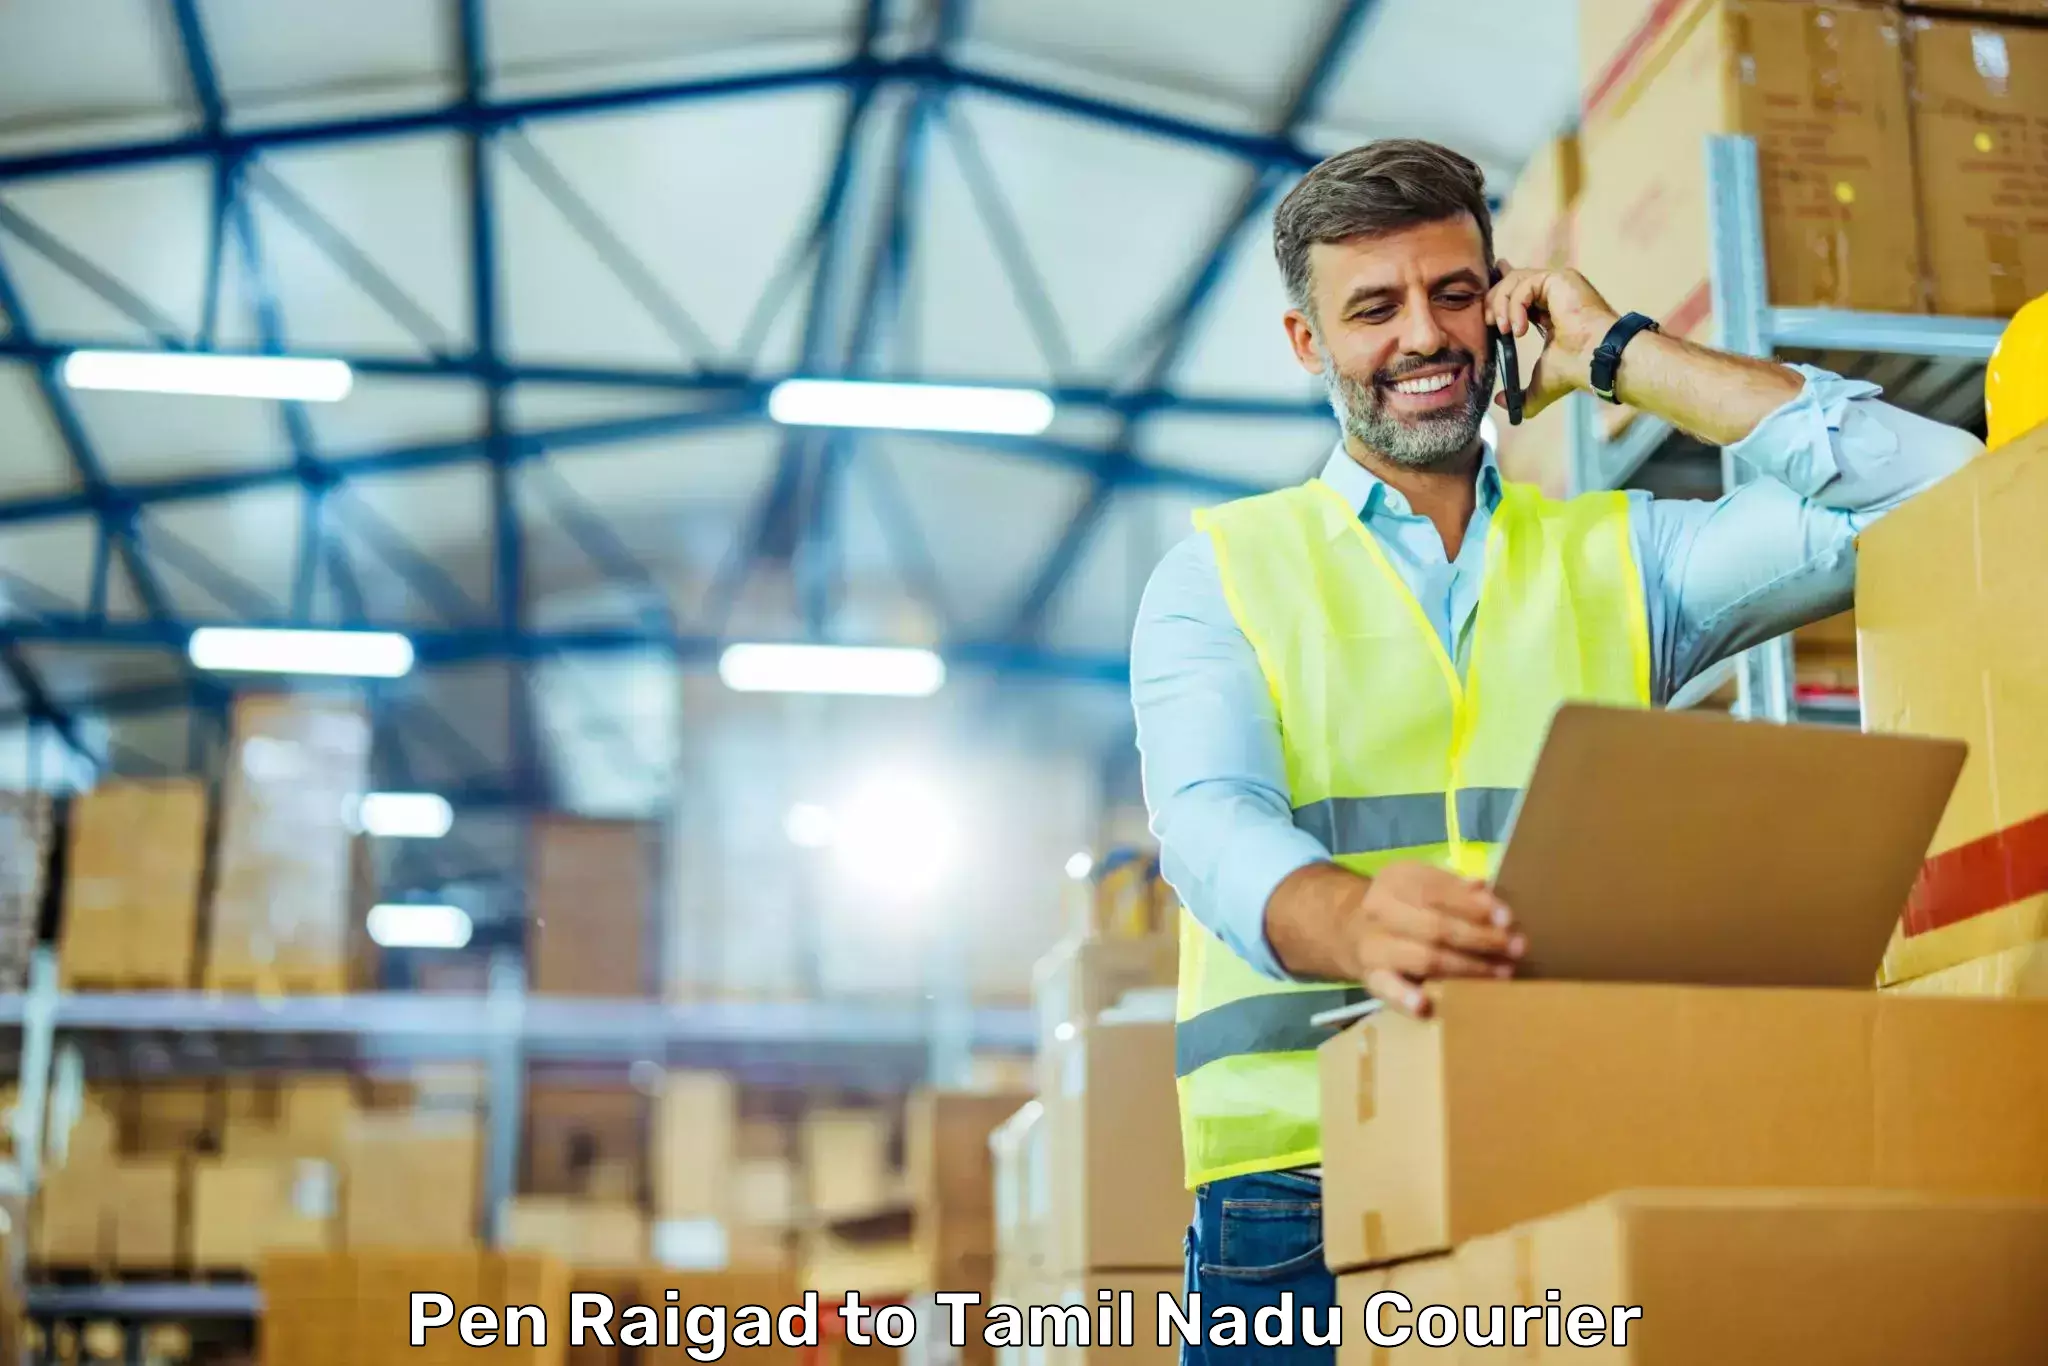 State-of-the-art courier technology Pen Raigad to Tamil Nadu